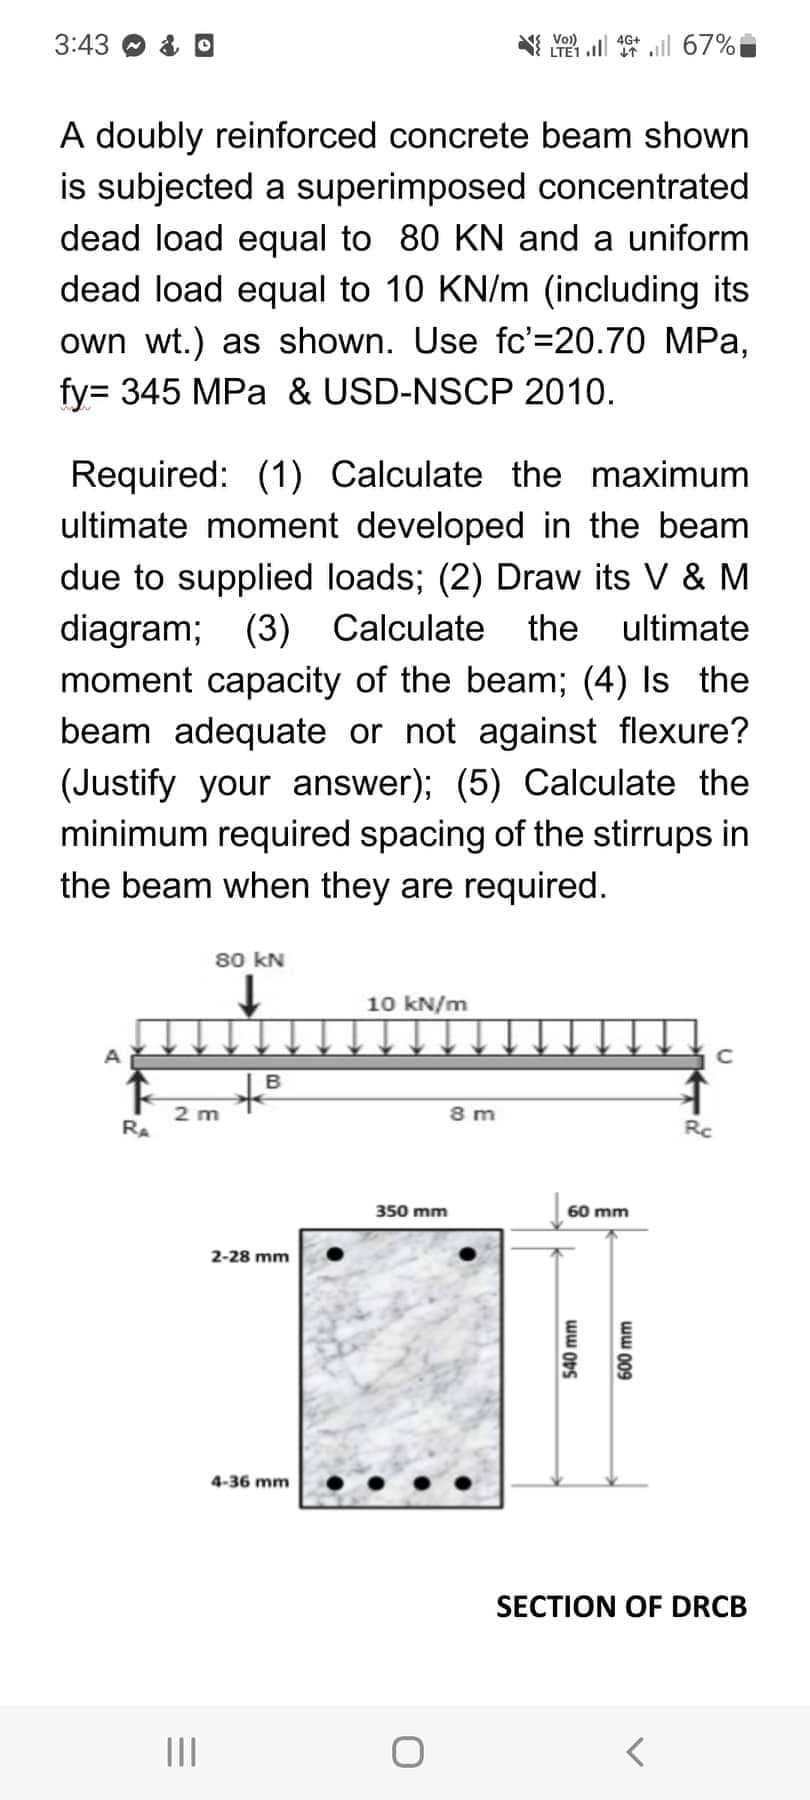 3:43
A doubly reinforced concrete beam shown
is subjected a superimposed concentrated
dead load equal to 80 KN and a uniform
dead load equal to 10 KN/m (including its
own wt.) as shown. Use fc'=20.70 MPa,
fy= 345 MPa & USD-NSCP 2010.
A
Required: (1) Calculate the maximum
ultimate moment developed in the beam
due to supplied loads; (2) Draw its V & M
diagram; (3) Calculate the ultimate
moment capacity of the beam; (4) Is the
beam adequate or not against flexure?
(Justify your answer); (5) Calculate the
minimum required spacing of the stirrups in
the beam when they are required.
↑
RA
2 m
=
80 KN
↓
|||
B
+8
2-28 mm
4-36 mm
10 kN/m
V46+67%
350 mm
LTE1
8m
60 mm
540 mm
600 mm
Rc
<
с
SECTION OF DRCB